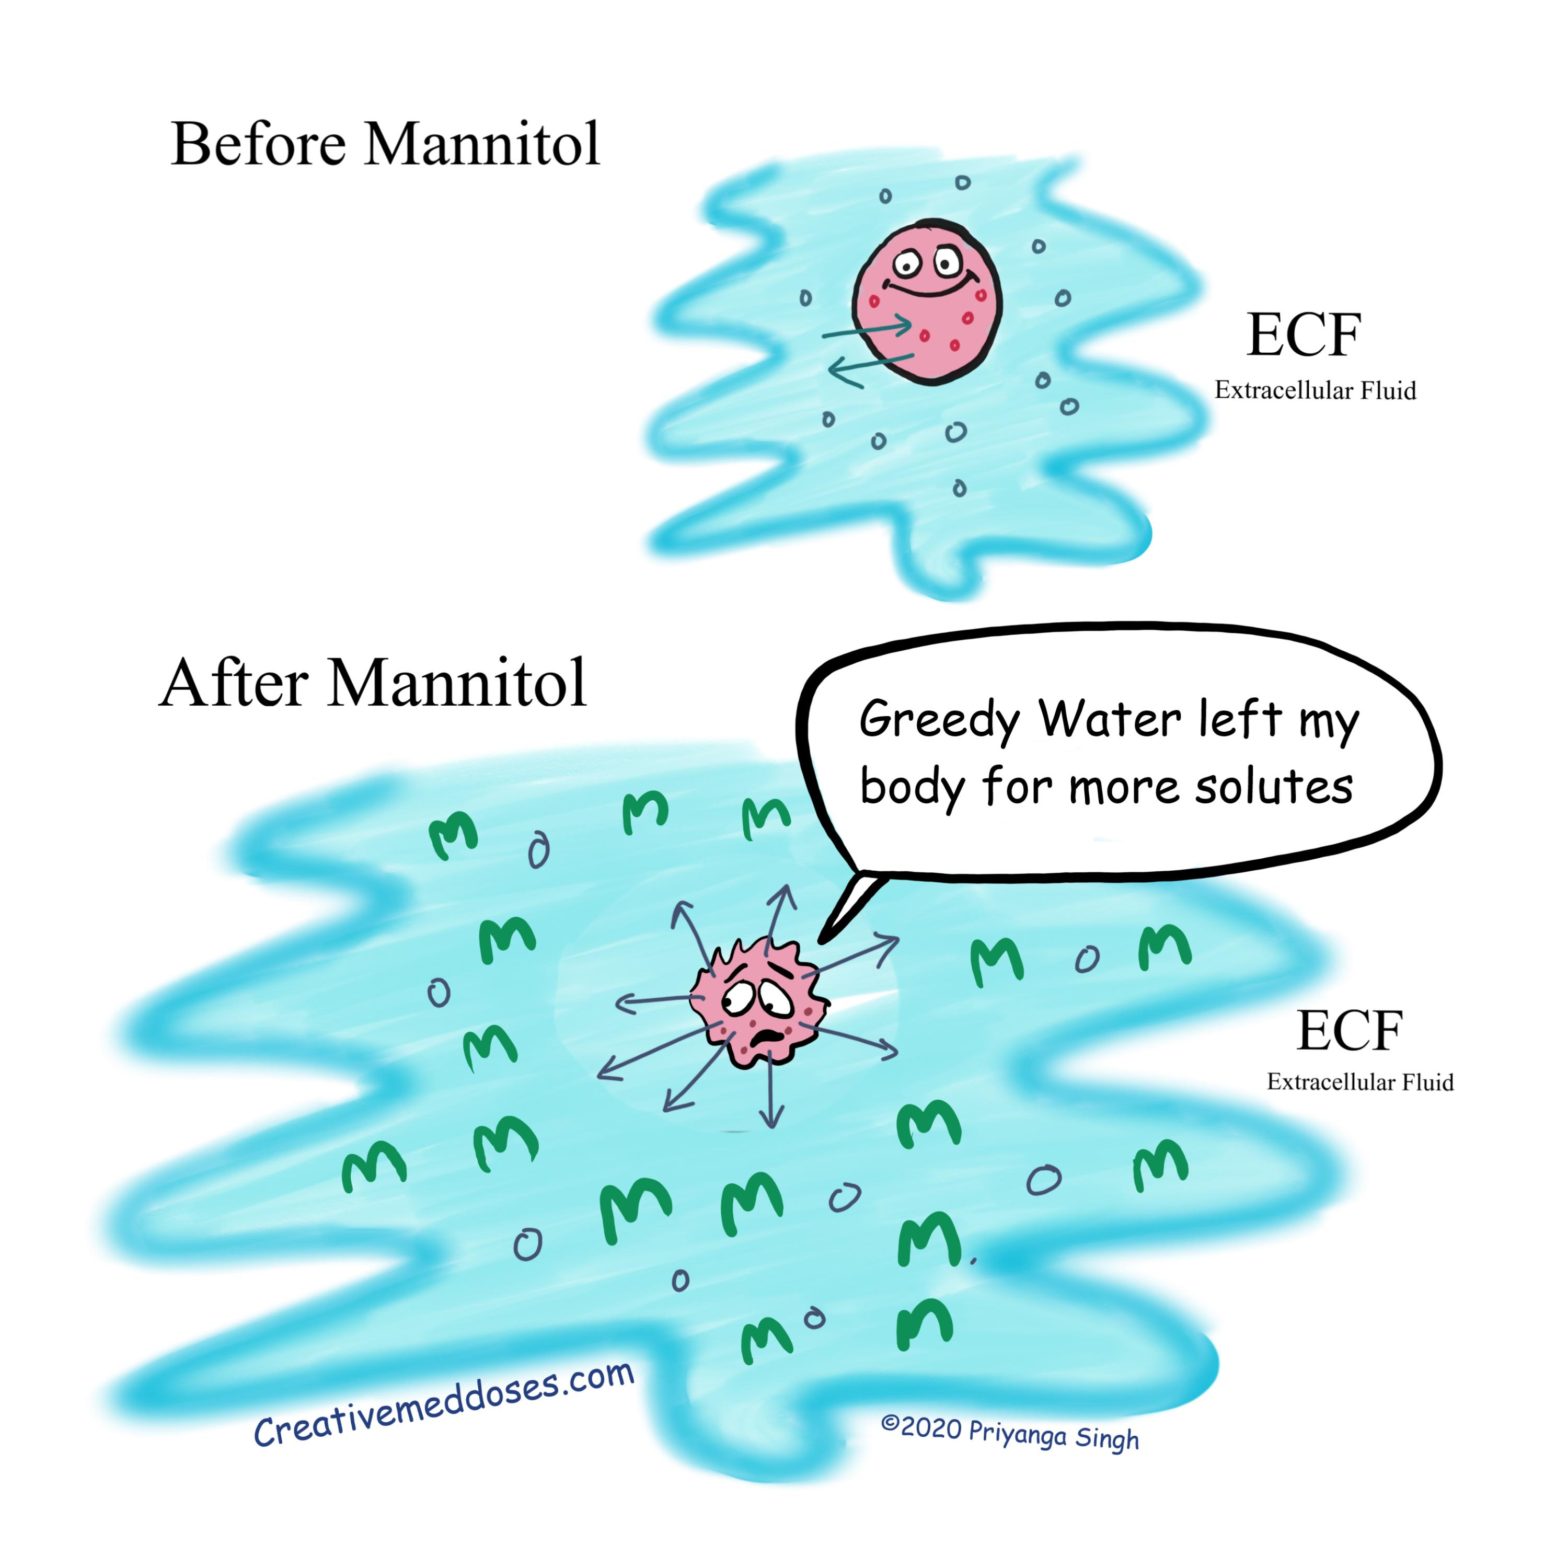 Mannitol and Extra Cellular Fluid expansion